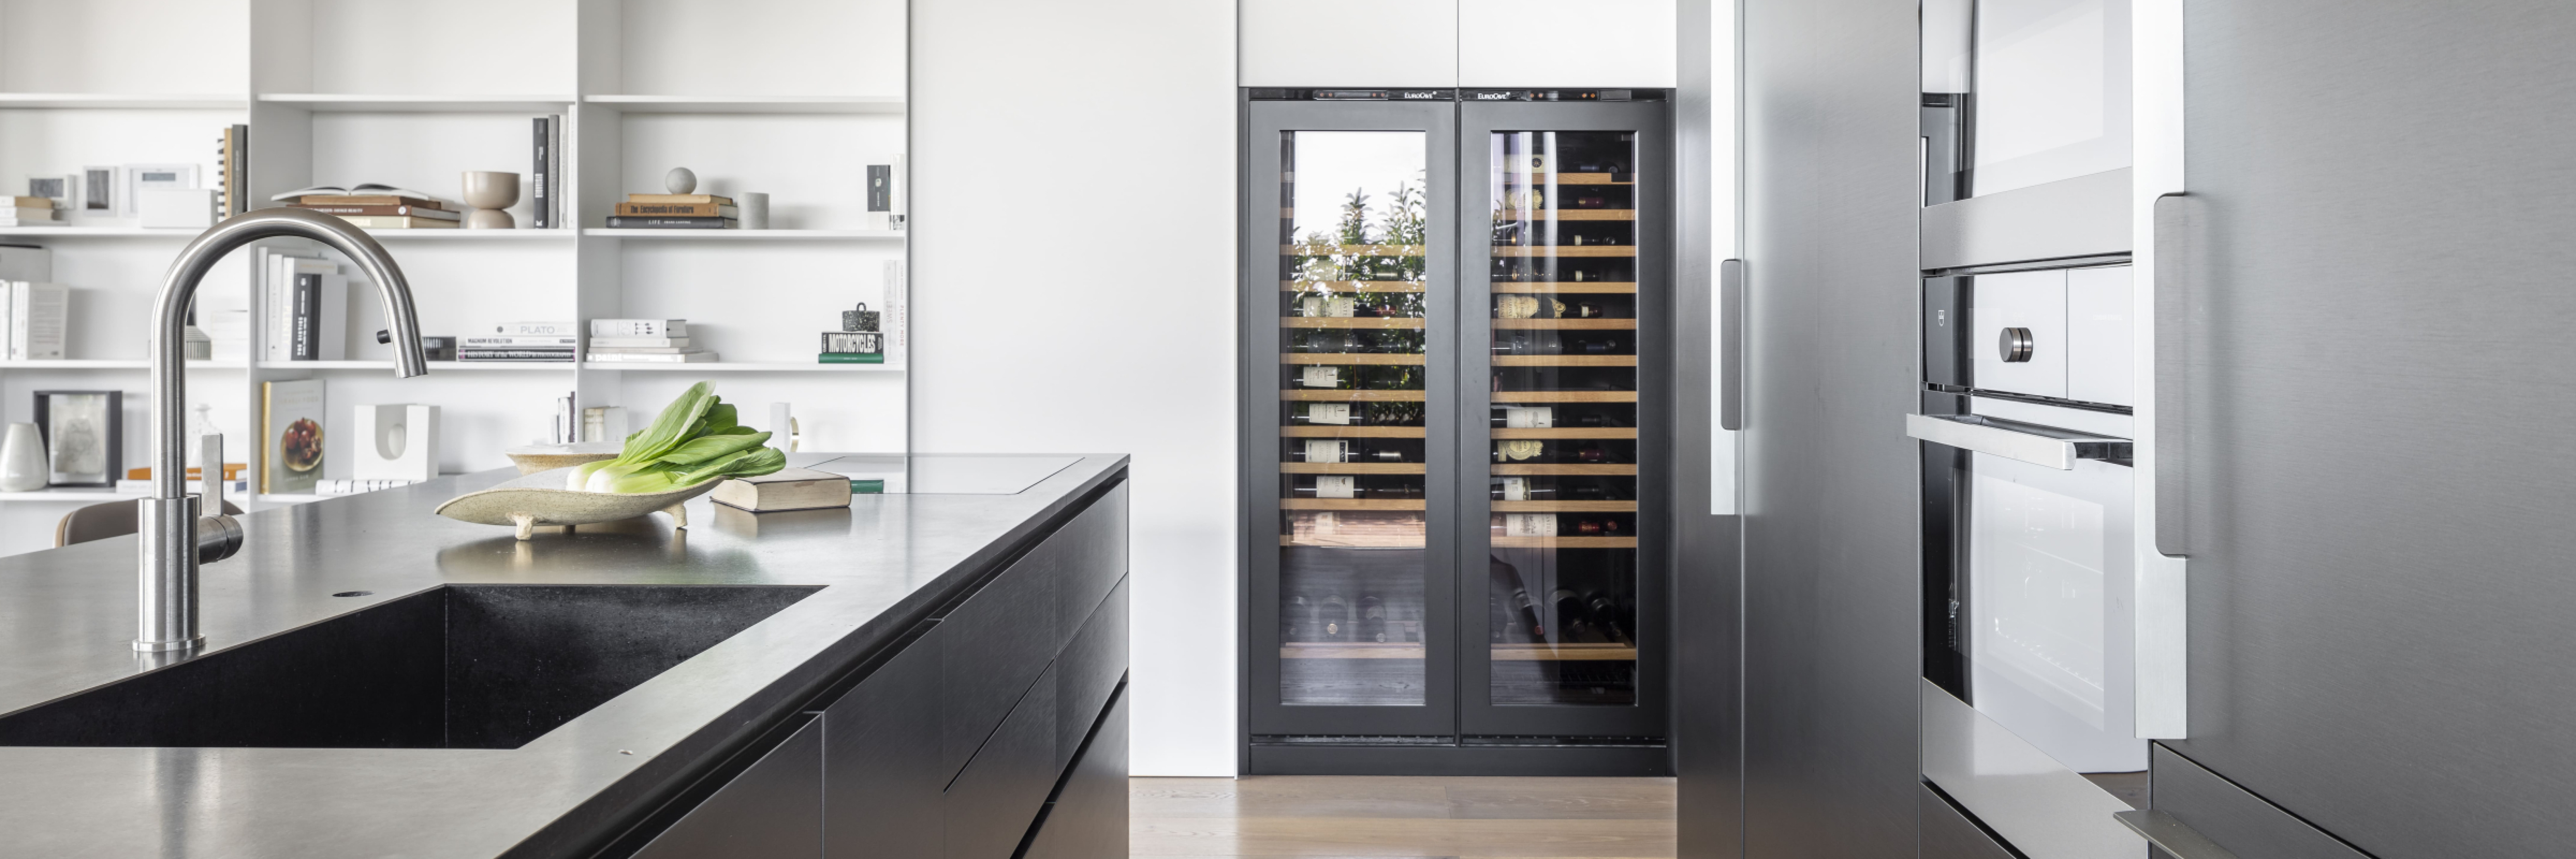 Double wine cooler integrated in fitted kitchen wall unit - technical glass door with adaptation of unit fronts.